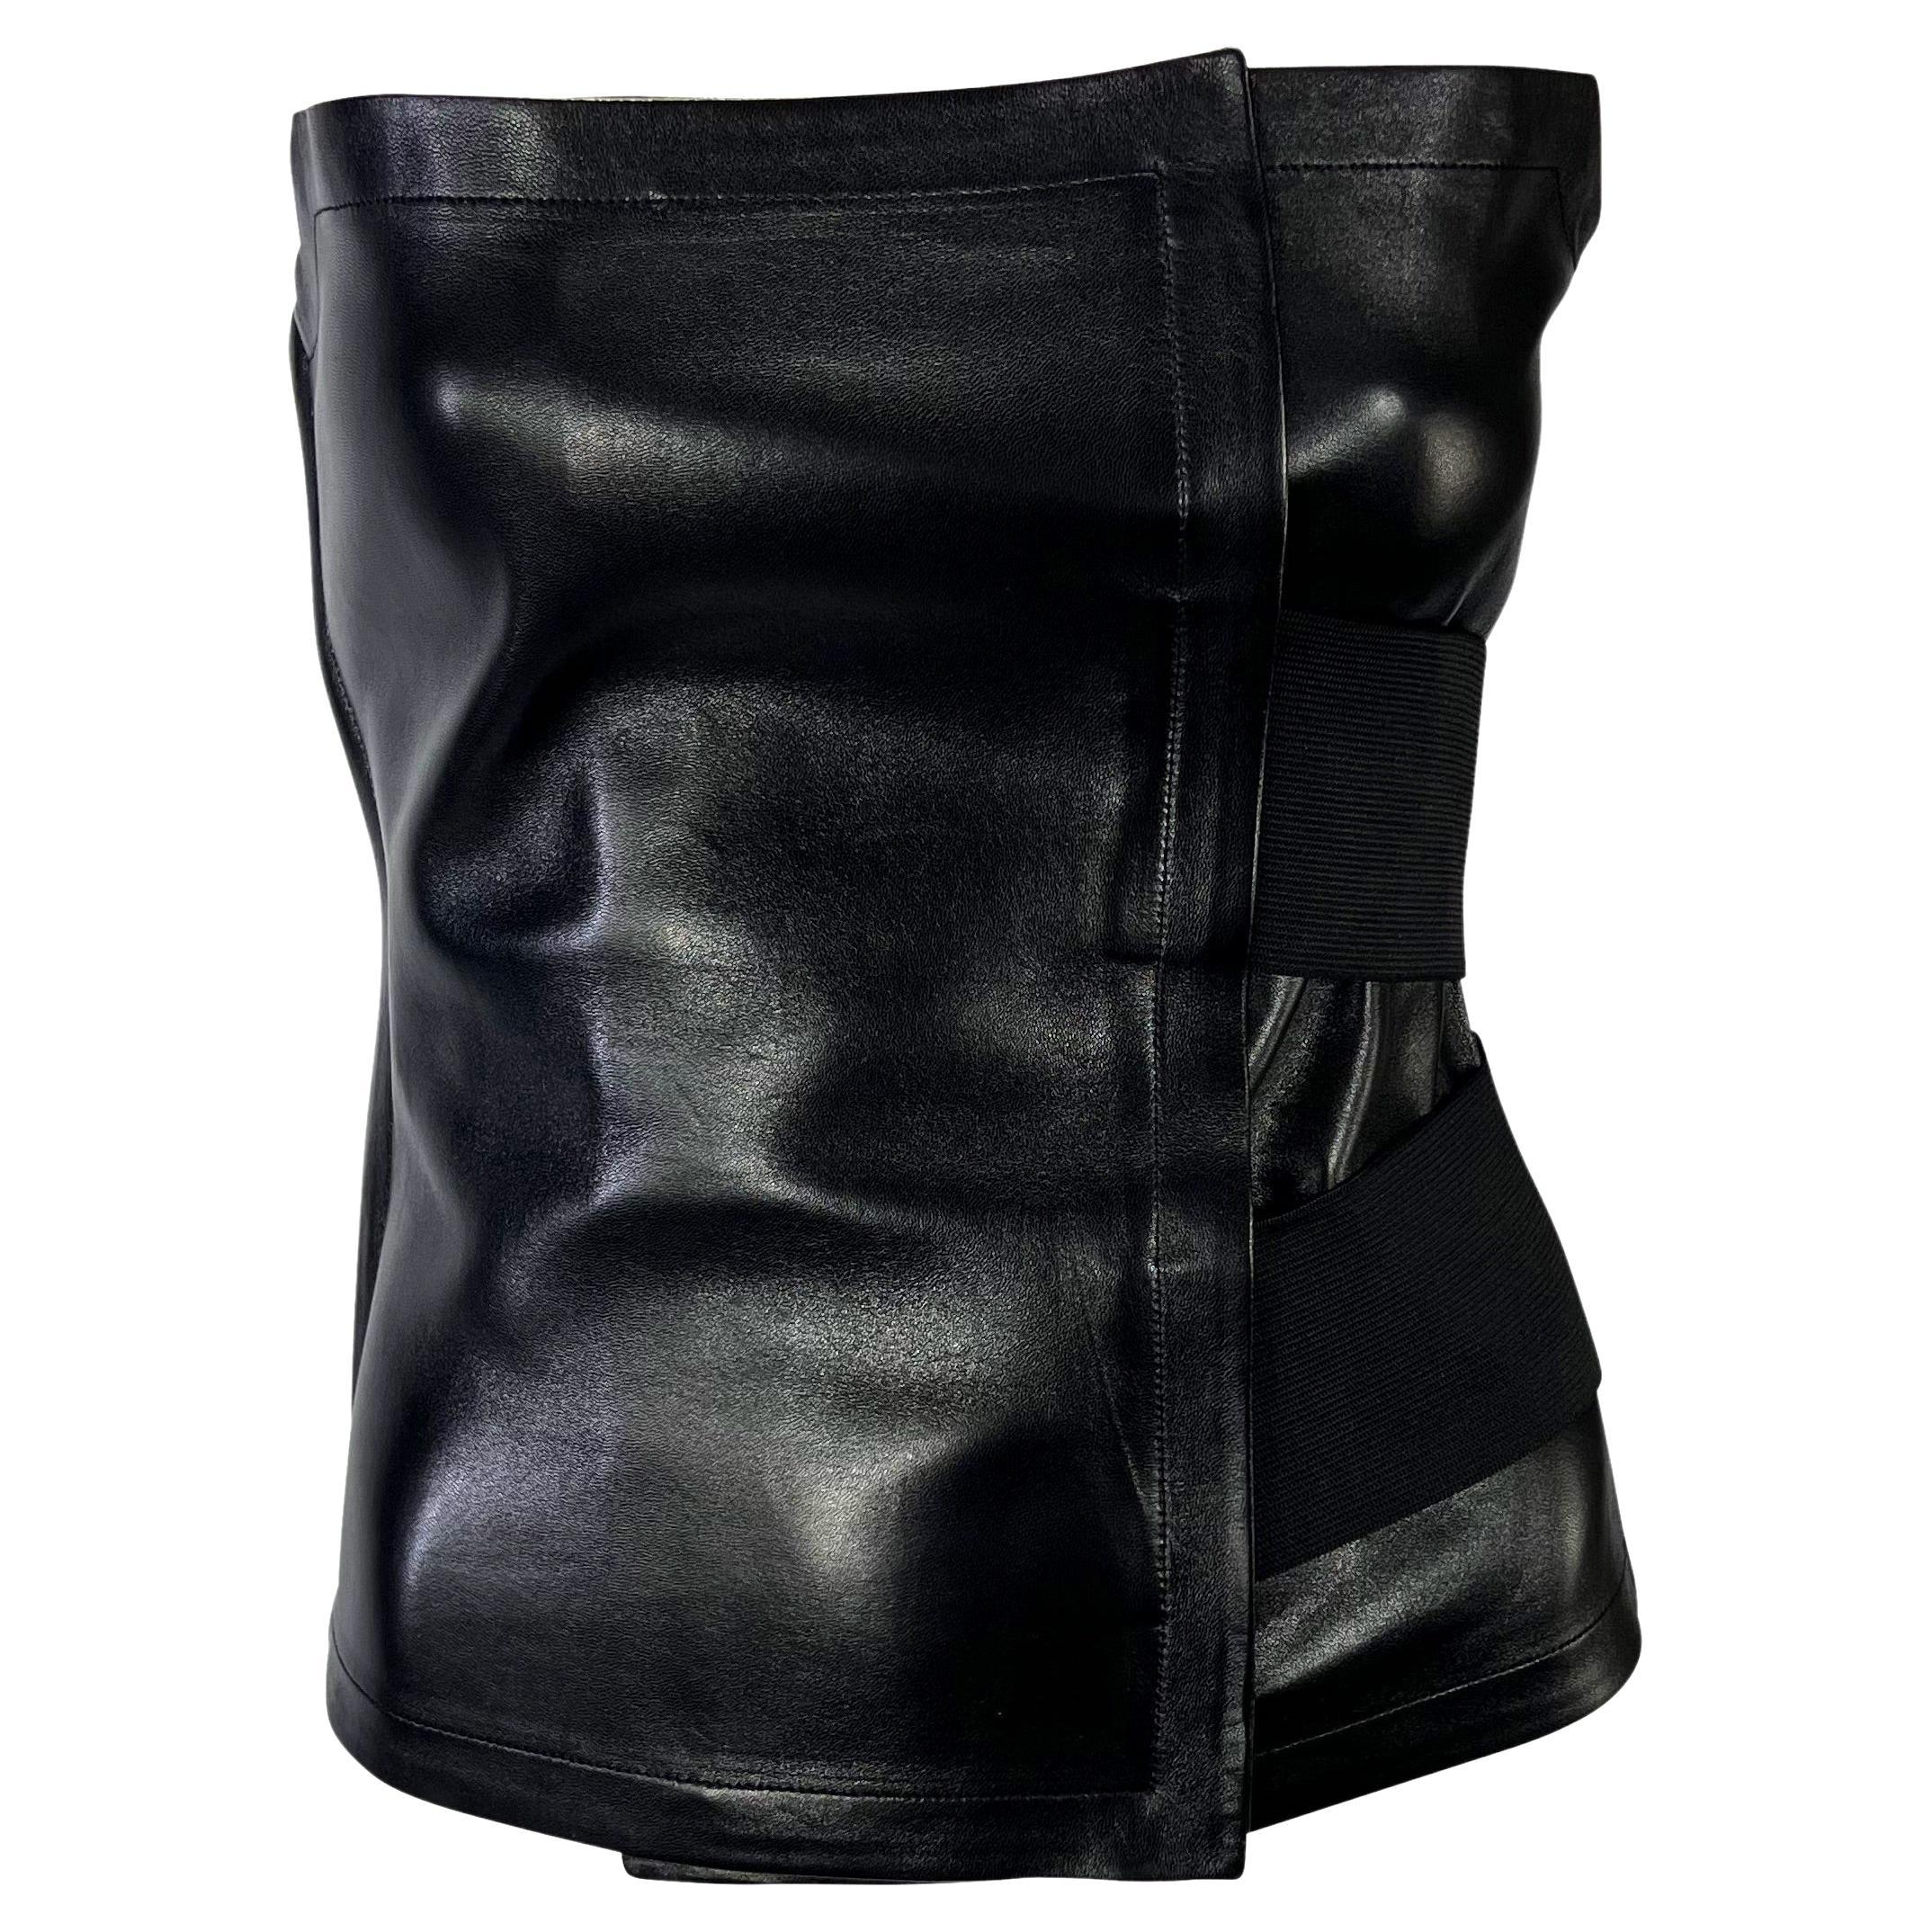 NWT S/S 2001 Yves Saint Laurent by Tom Ford Black Leather Bandage Strap Bustier For Sale 3